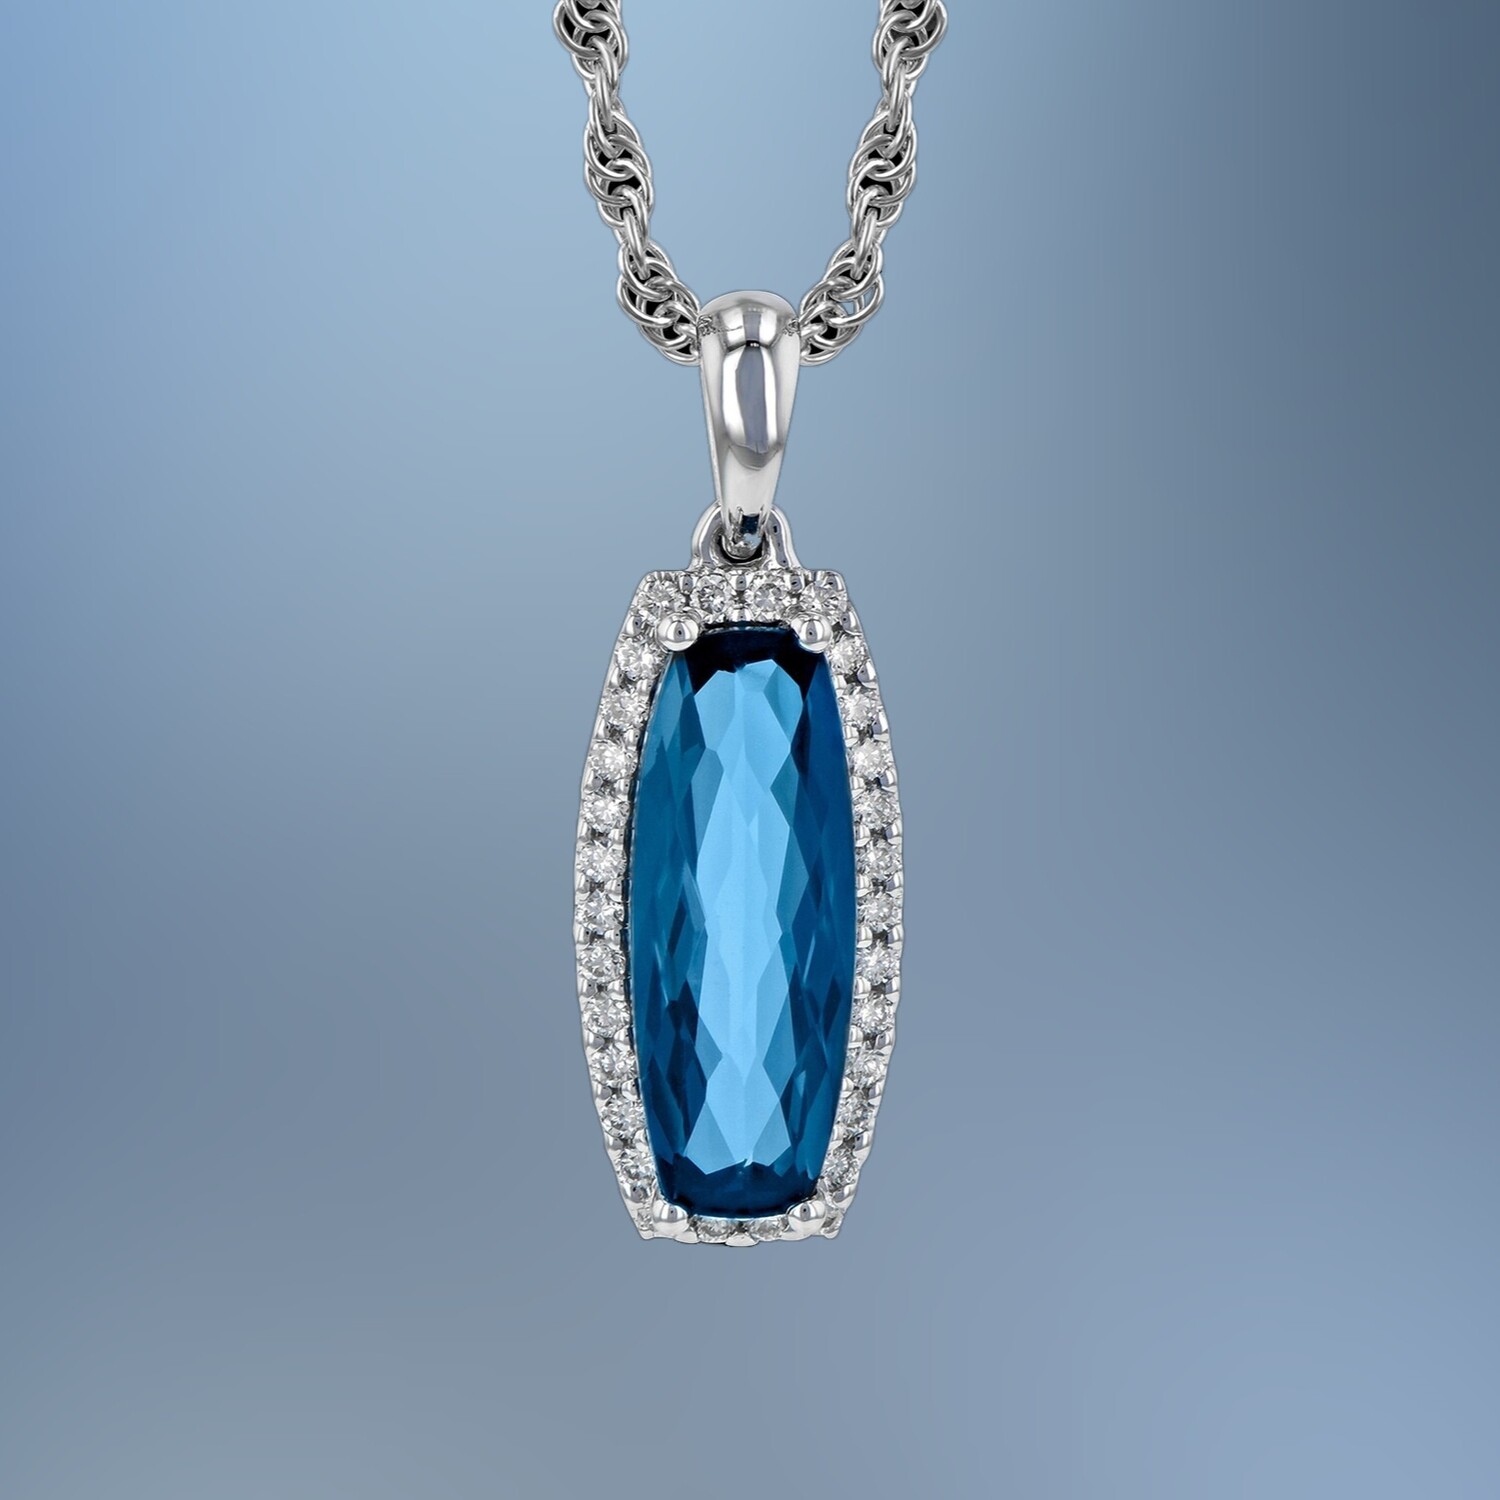 14KT WHITE GOLD BLUE TOPAZ & DIAMOND PENDANT FEATURING A 1.58 CT CUSHION CUT TOPAZ AND 30 ROUND BRILLIANT CUT DIAMONDS TOTALING 0.12 CTS